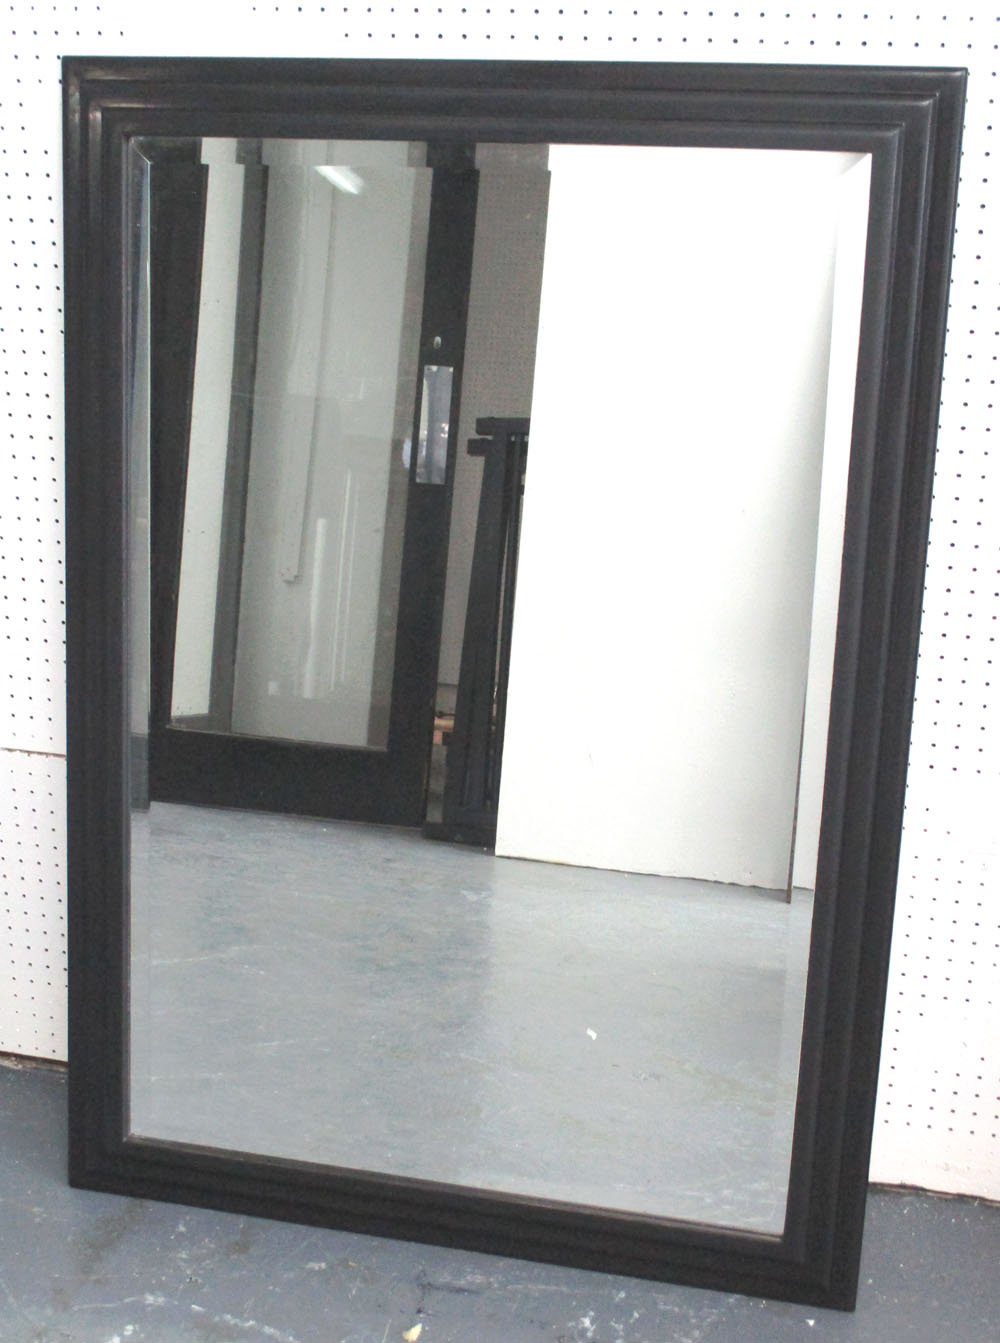 WALL MIRROR, with rectangular black moulded frame, 100cm x 72cm.